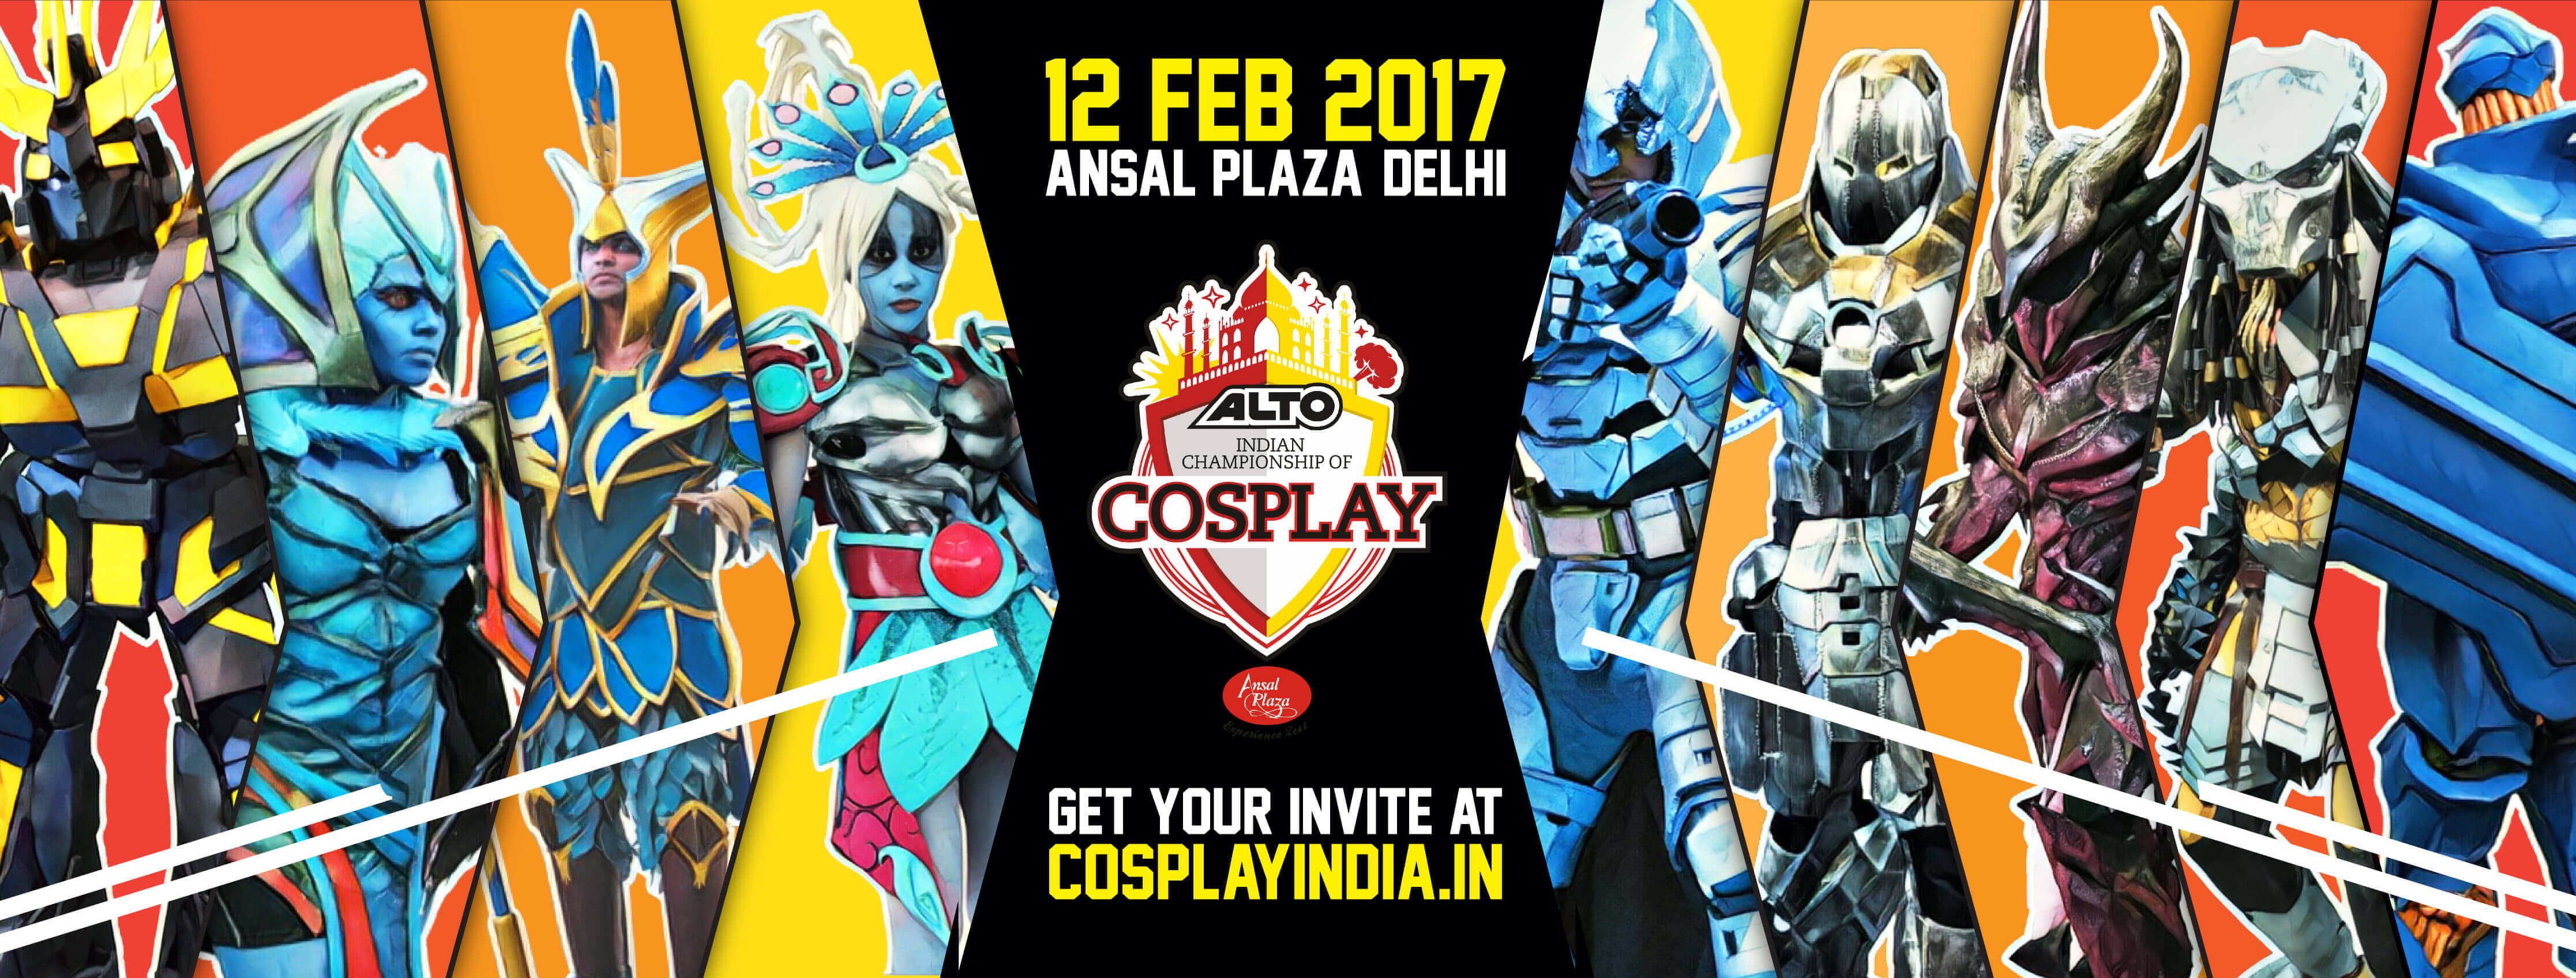 Alto Indian Championship of Cosplay 2017 (1) (1)